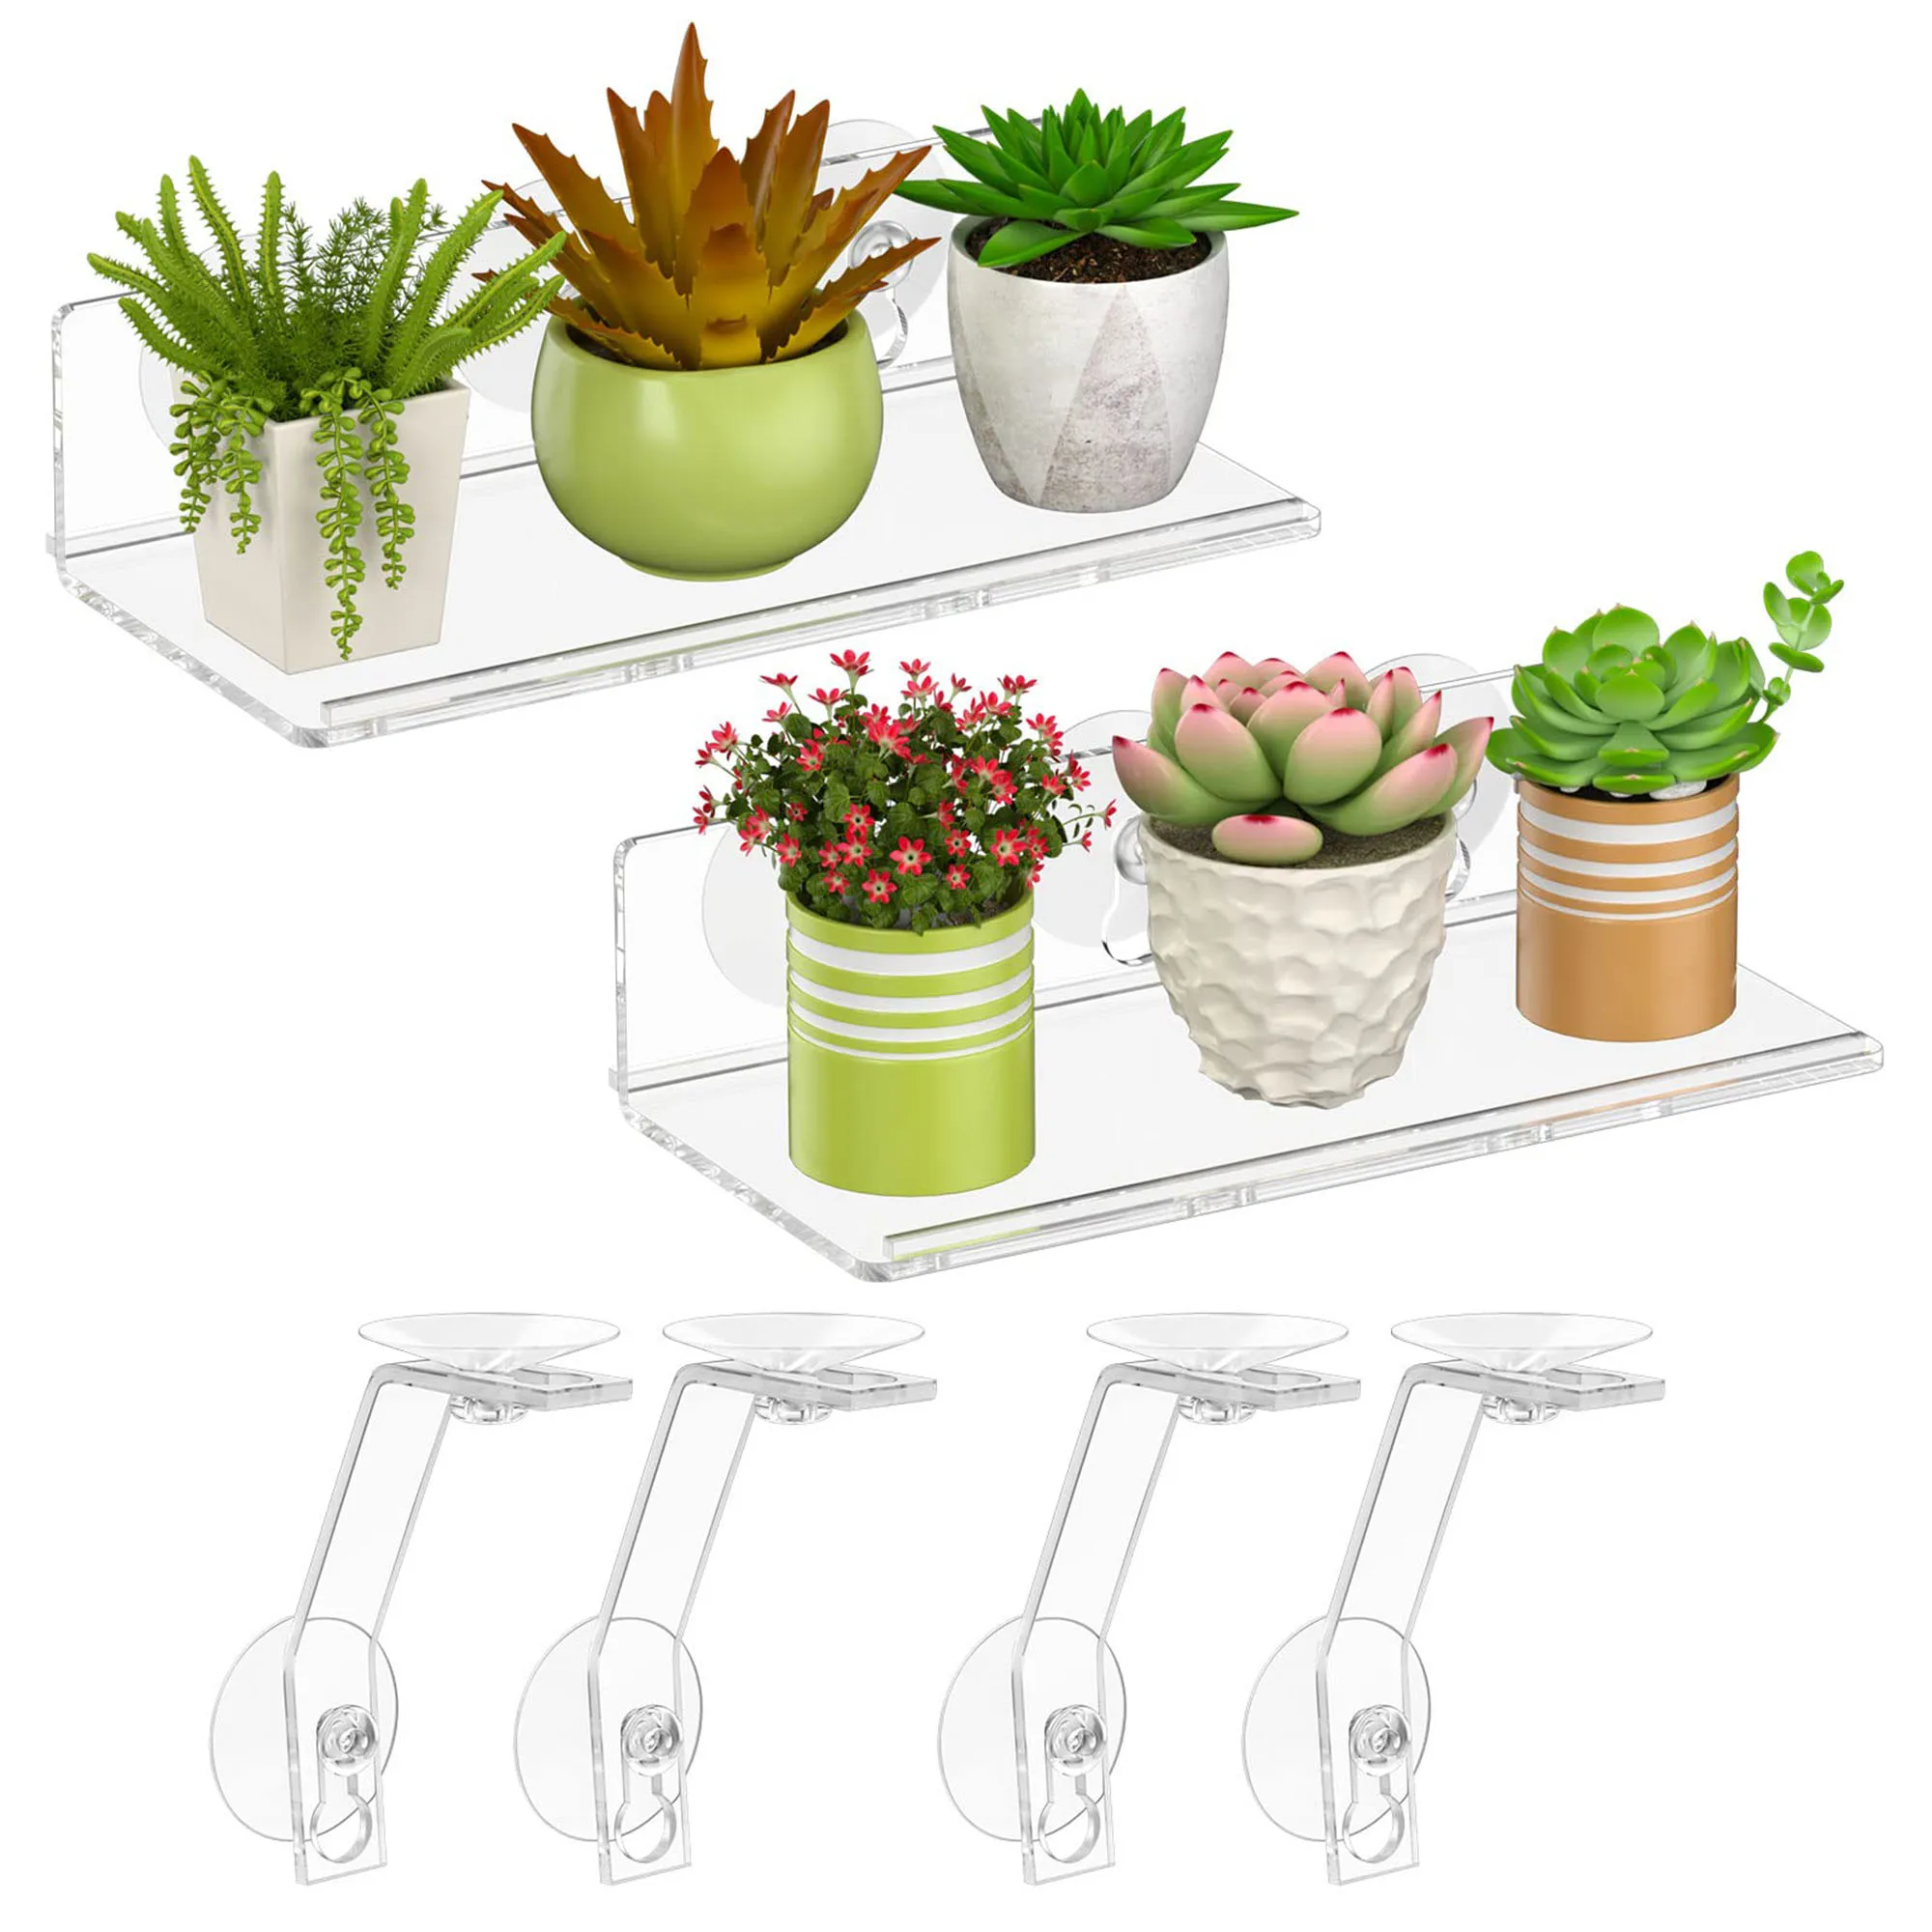 https://ae01.alicdn.com/kf/A80a21b5f47474ece865c8321b83878b93/Clear-Acrylic-Suction-Cup-Shelf-Window-Plant-Shelves-with-Legs-Indoor-Ledge-Garden-Stand-Tool-Free.jpg